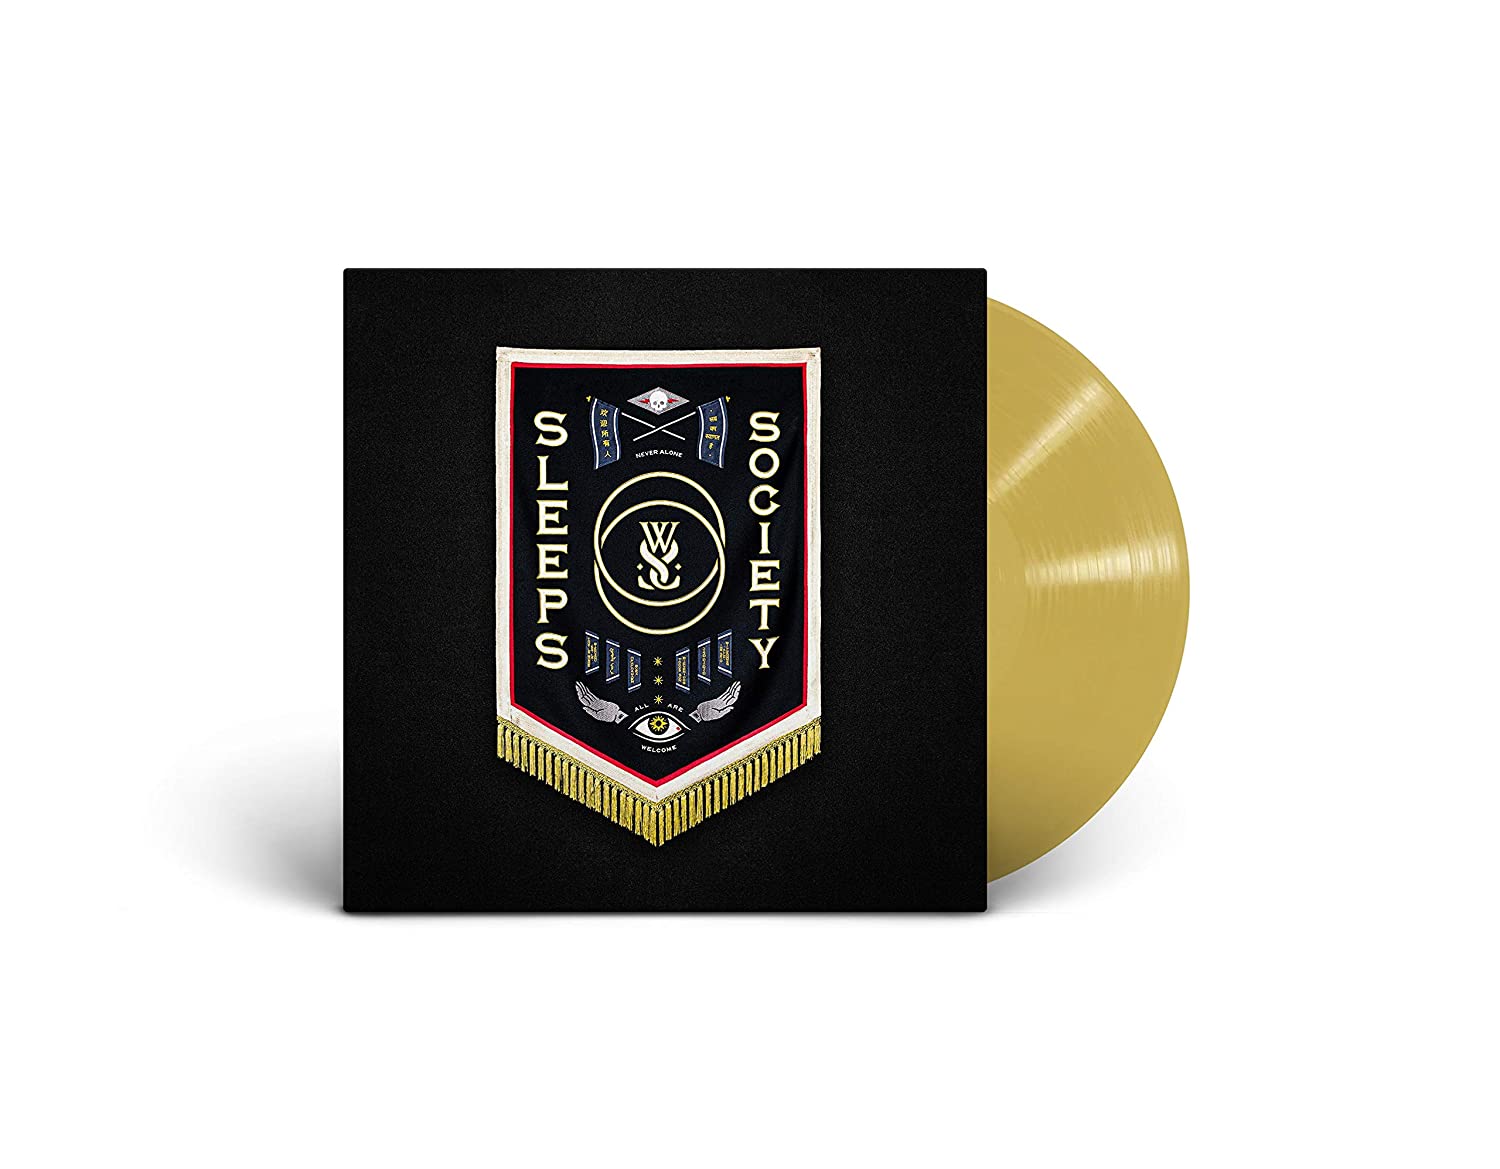 While She Sleeps - Sleeps Society [Gold Nugget Colored Vinyl]